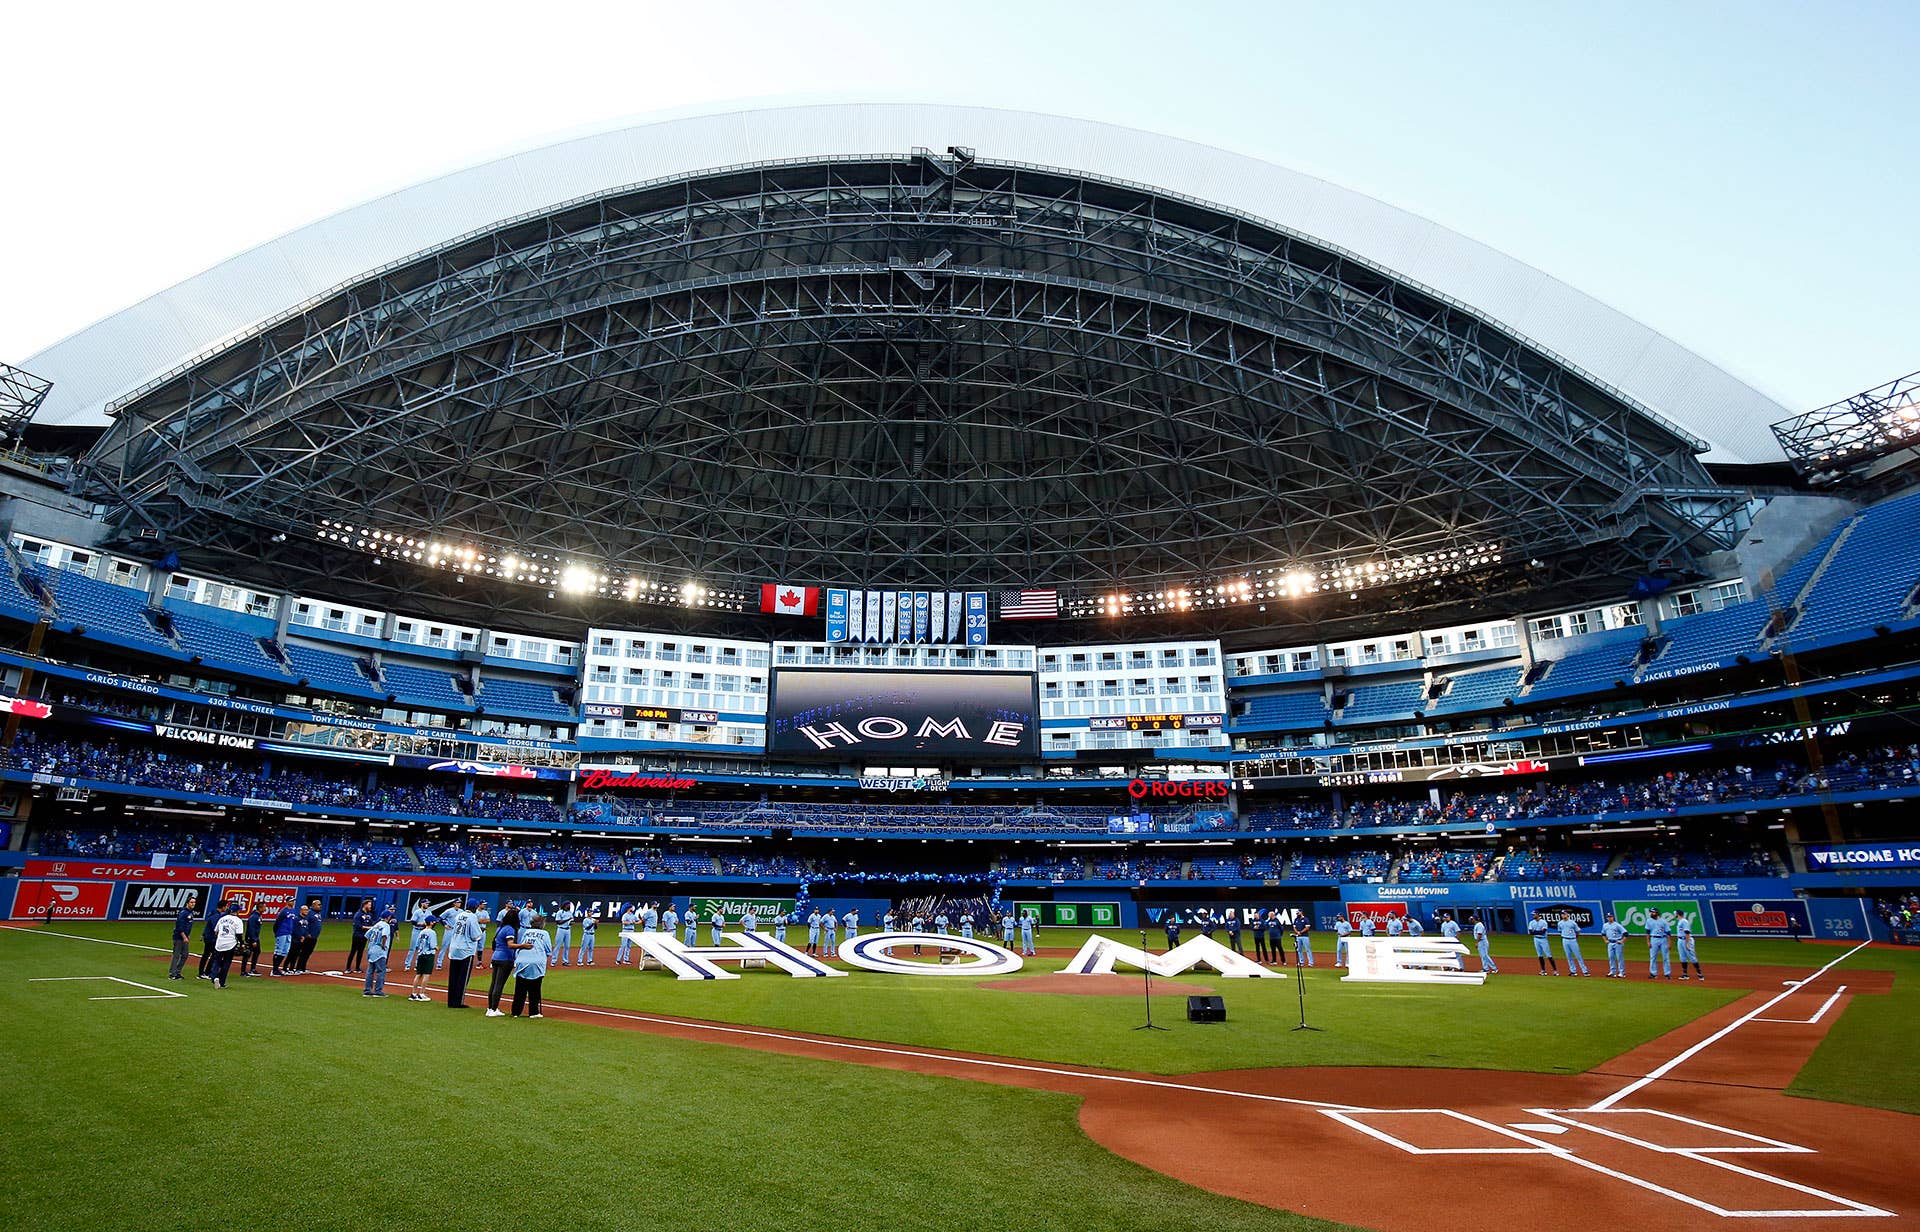 The Toronto Blue Jays line up behind a 'Home' sign to commemorate their first home game in Toronto this season prior to a MLB game against the Kansas City Royals at Rogers Centre on July 30, 2021 in Toronto, Canada.